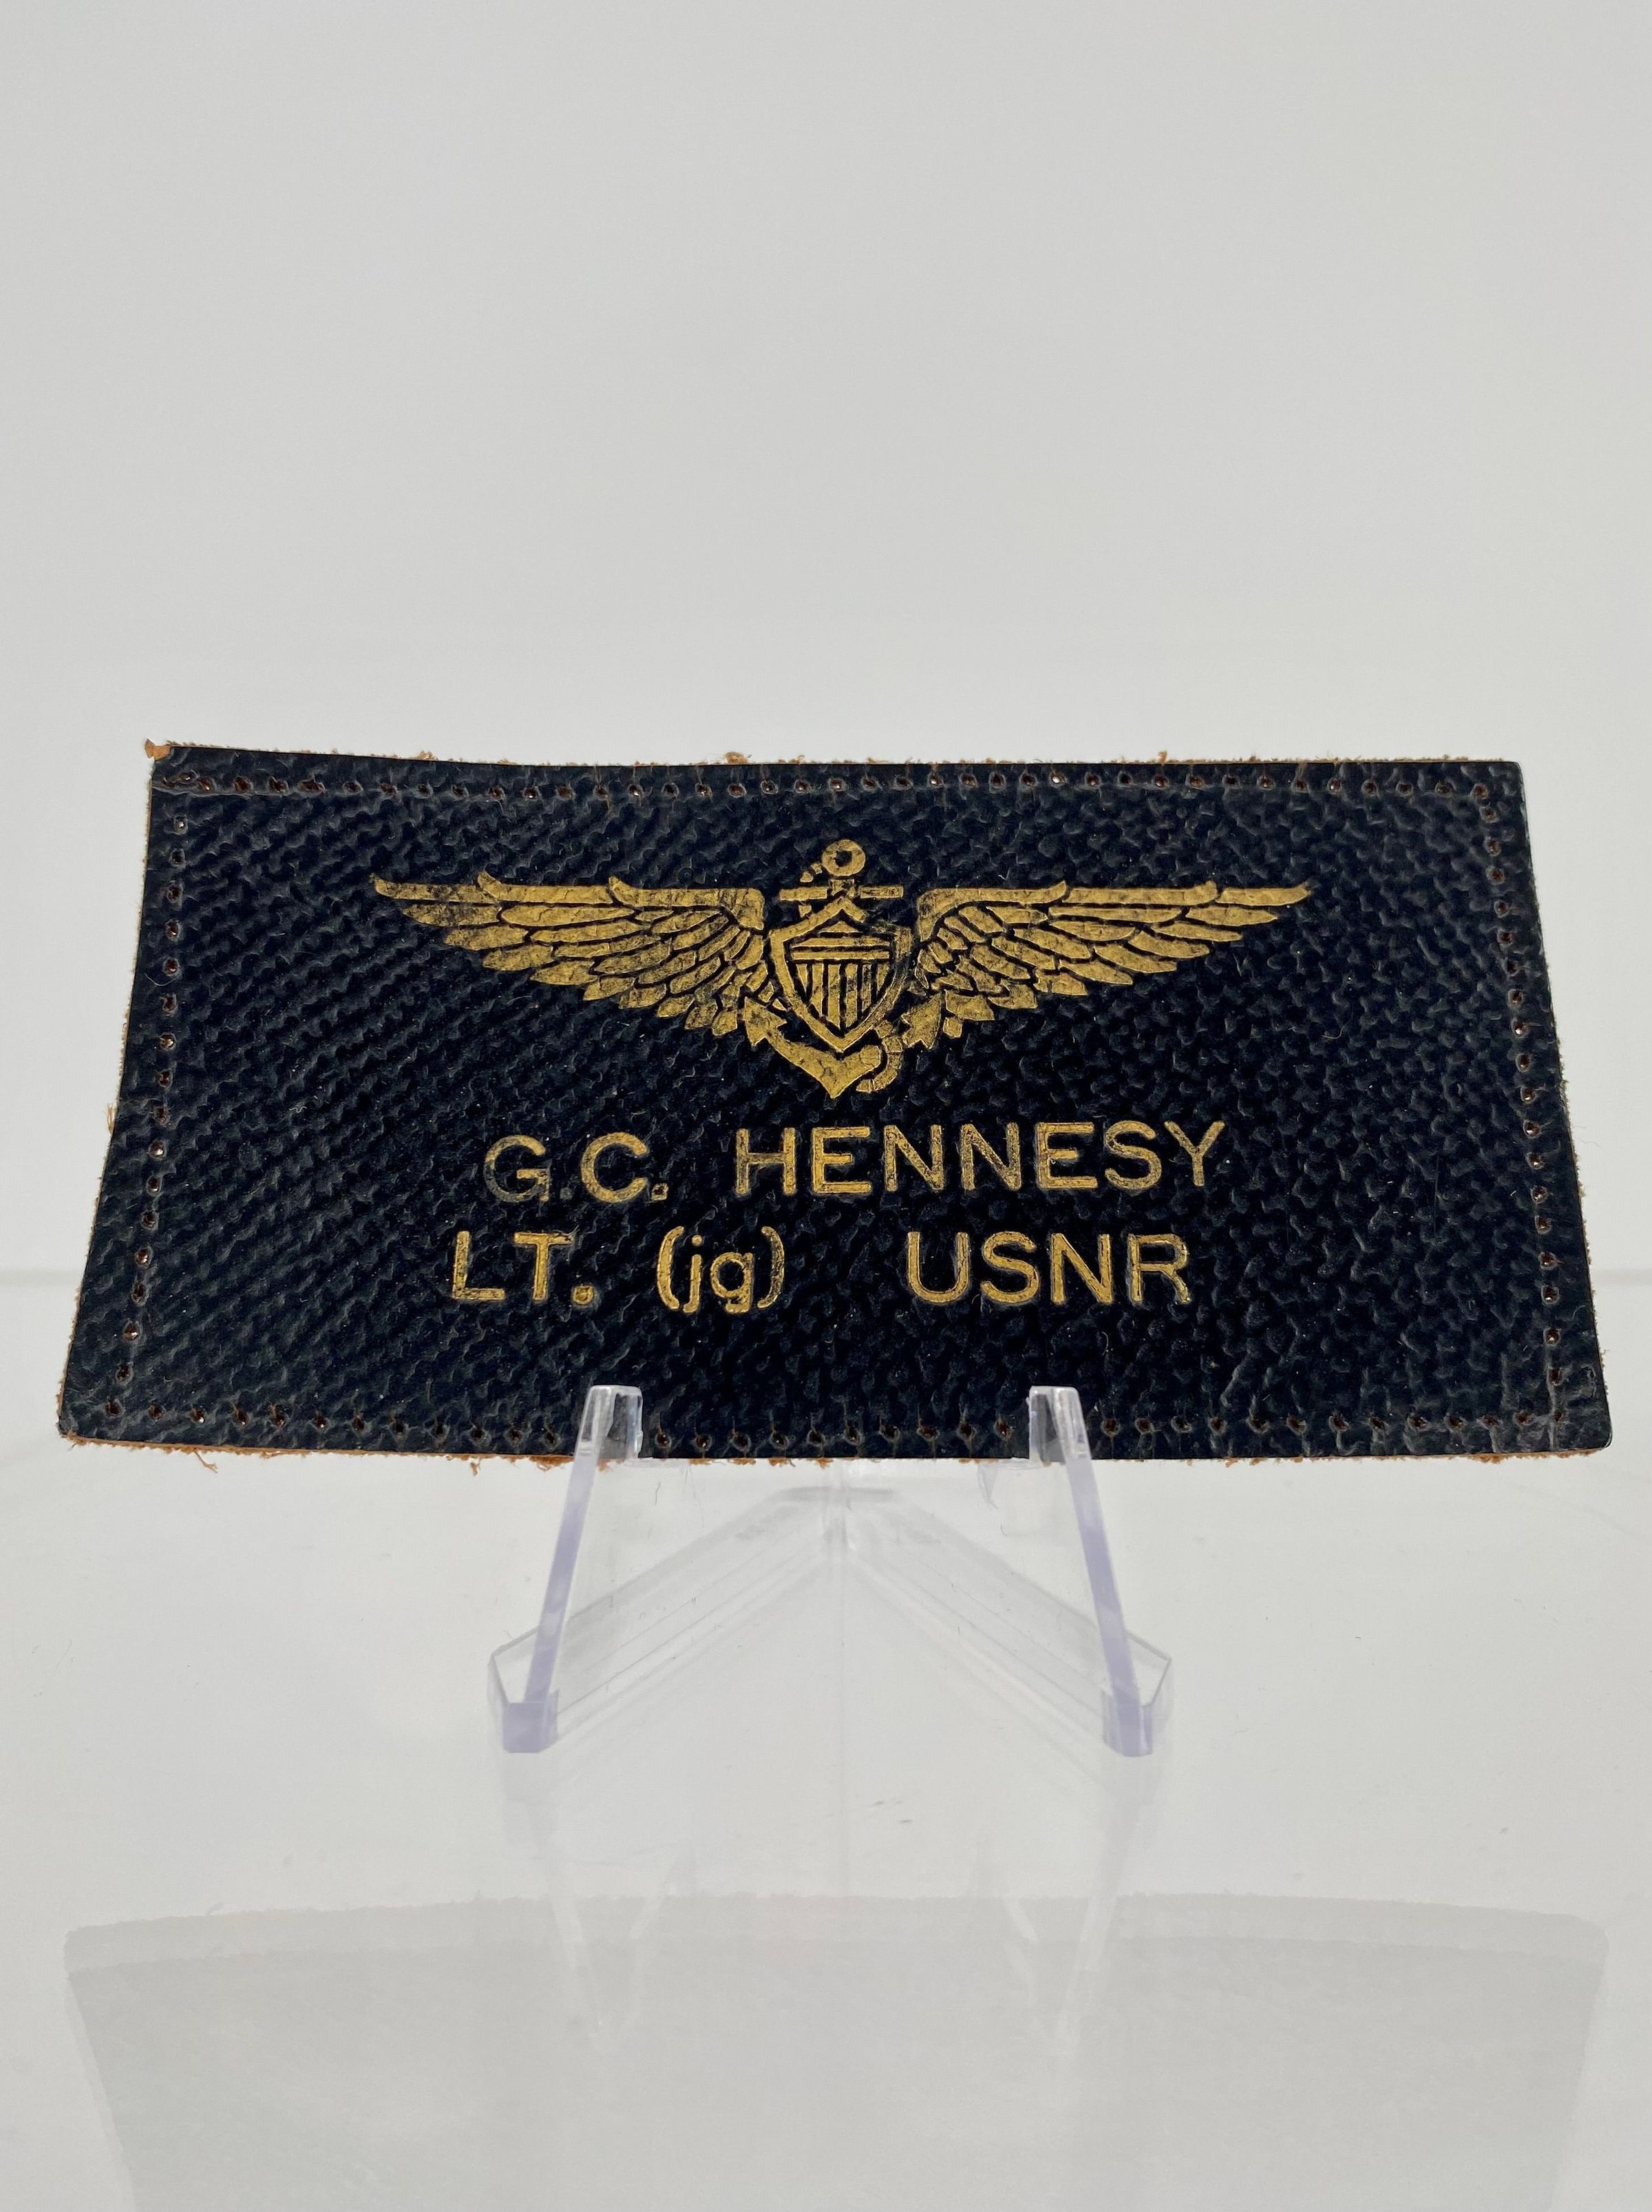 Primary Image of Flight Jacket Patch of Gerald Hennesy